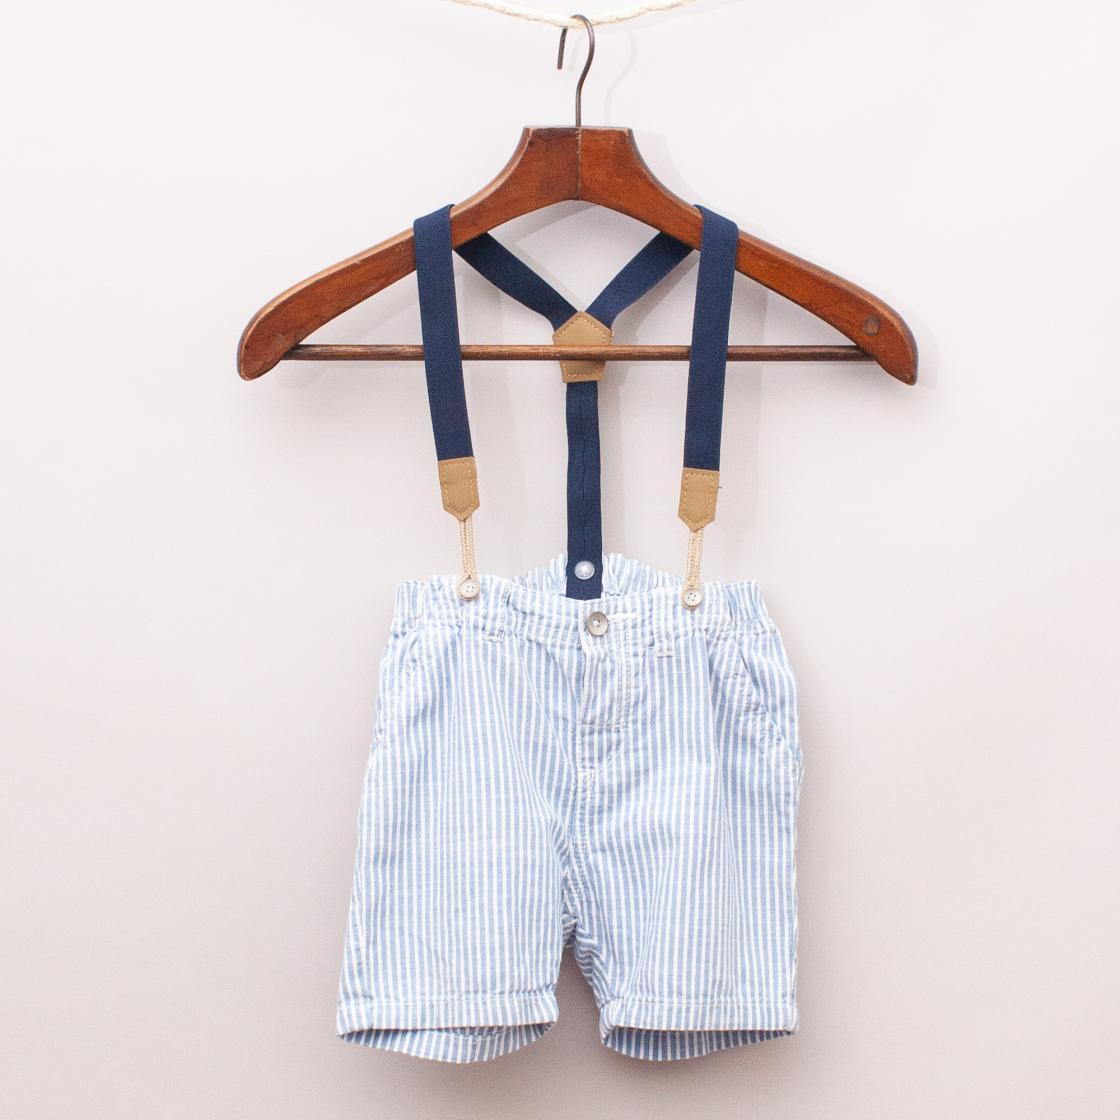 H&M Striped Shorts with Suspenders